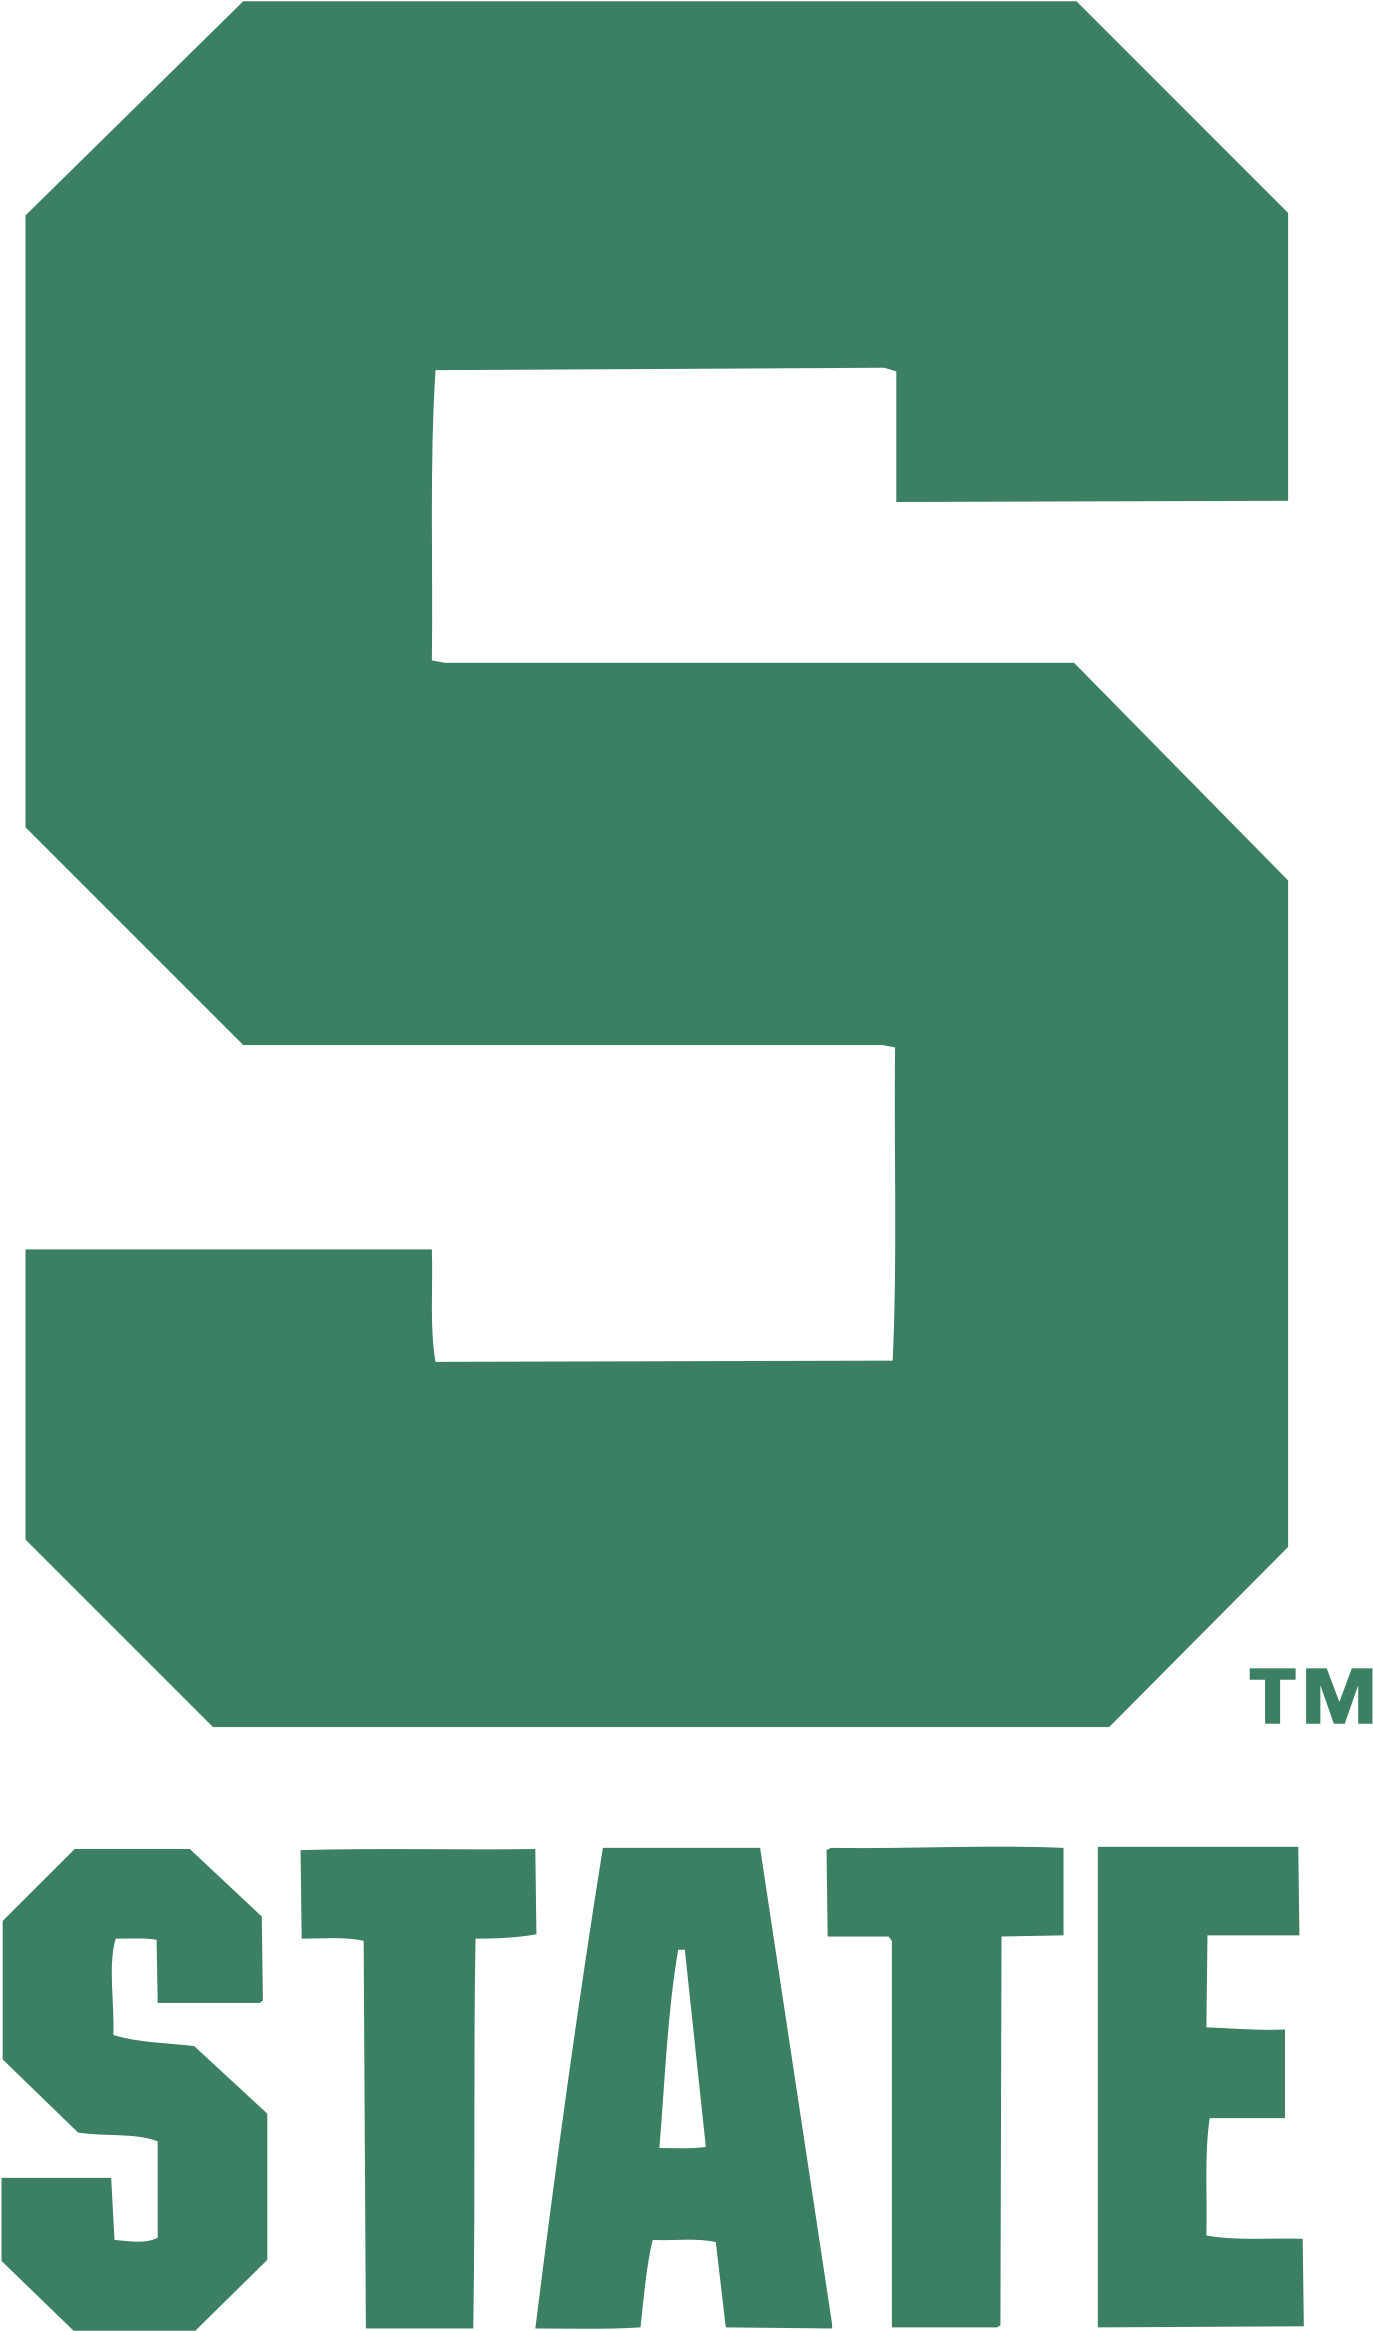 Michigan State Spartans Logo Png Transparent.